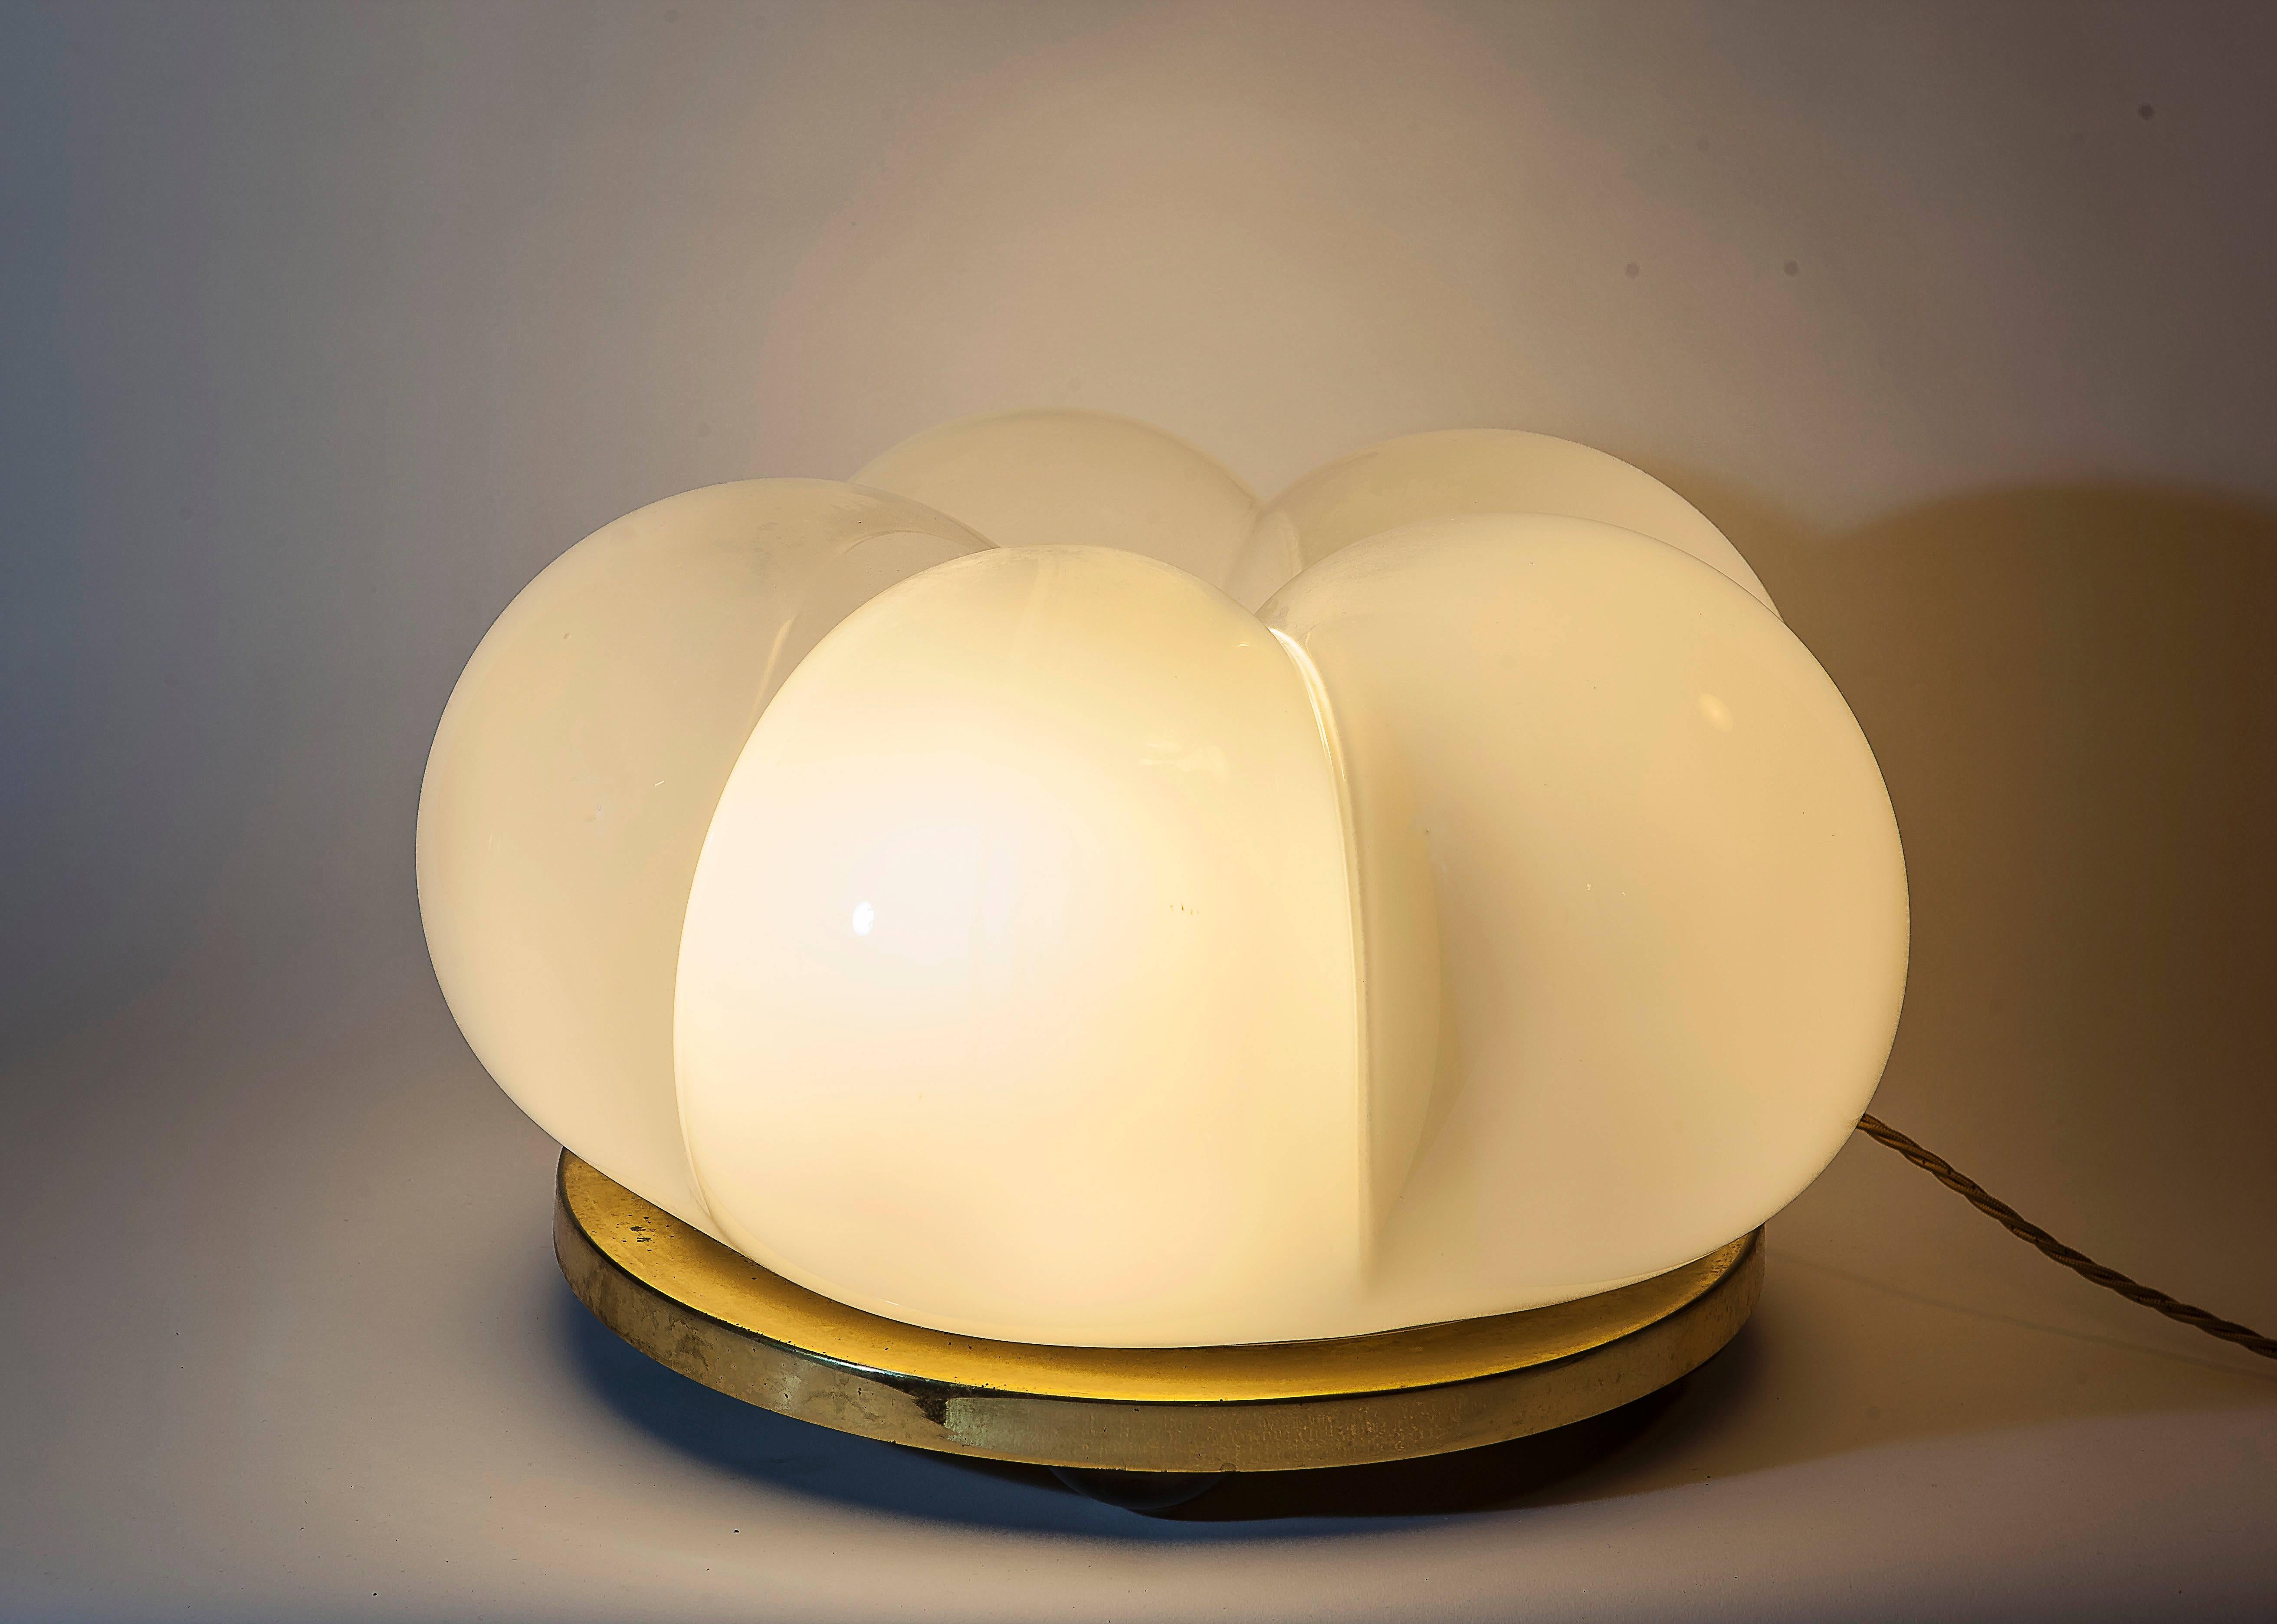 A very nice "lattimo" glass sculpture lamp consisting of a brass base with an abstract sculpture inside a big blown glass shade in the shape of a cloud.